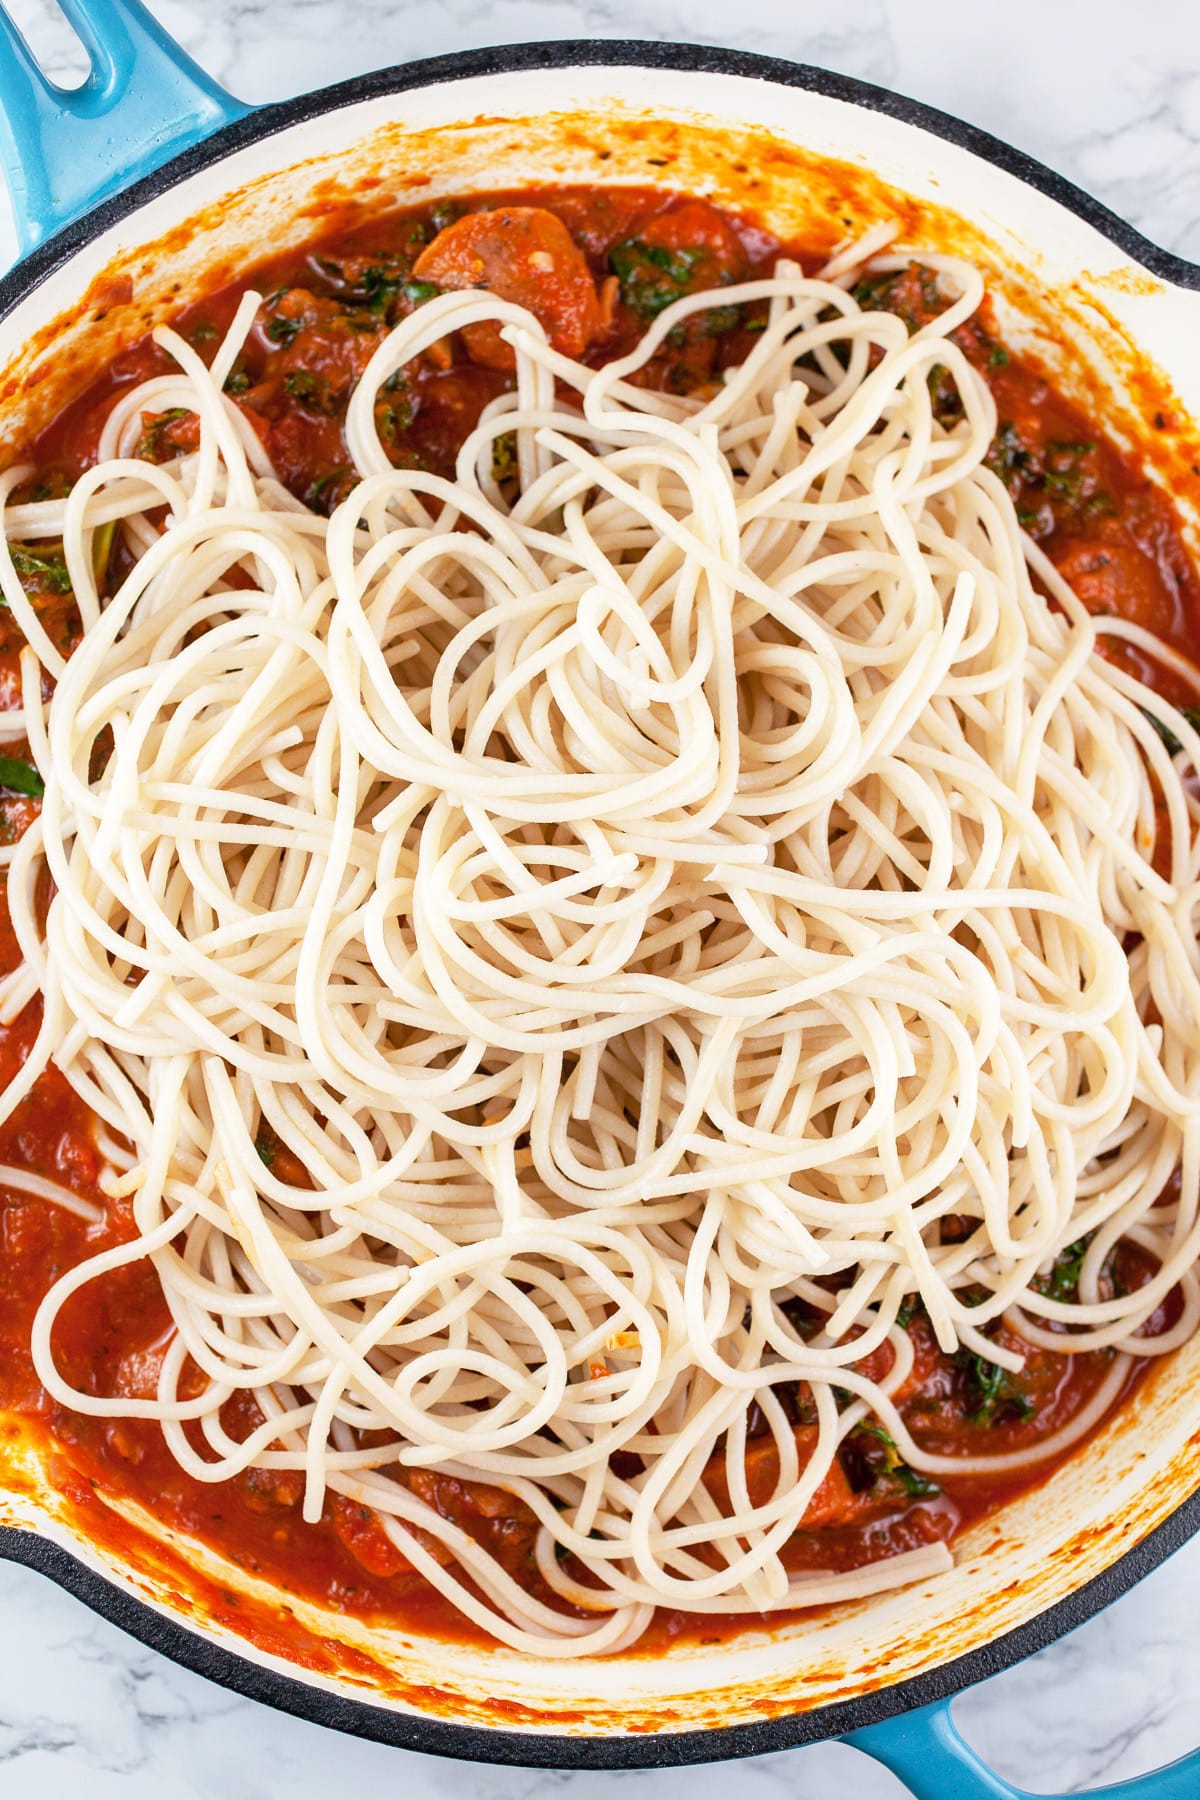 Cooked spaghetti noodles added to sauce in skillet.